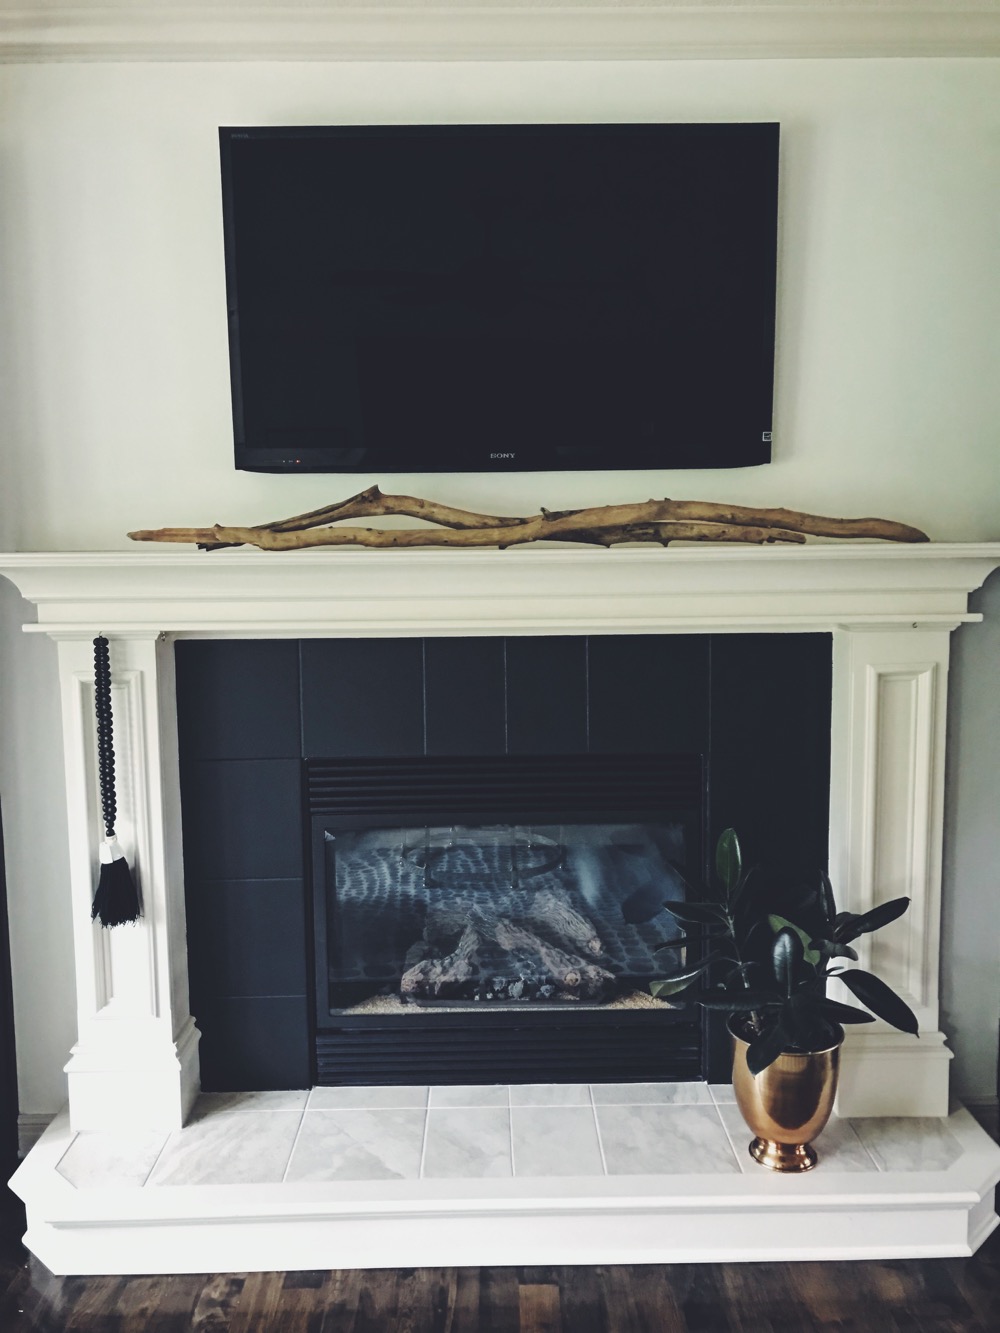 Painted Tile Around Fireplace Life, Do You Have To Put Tile Around A Fireplace